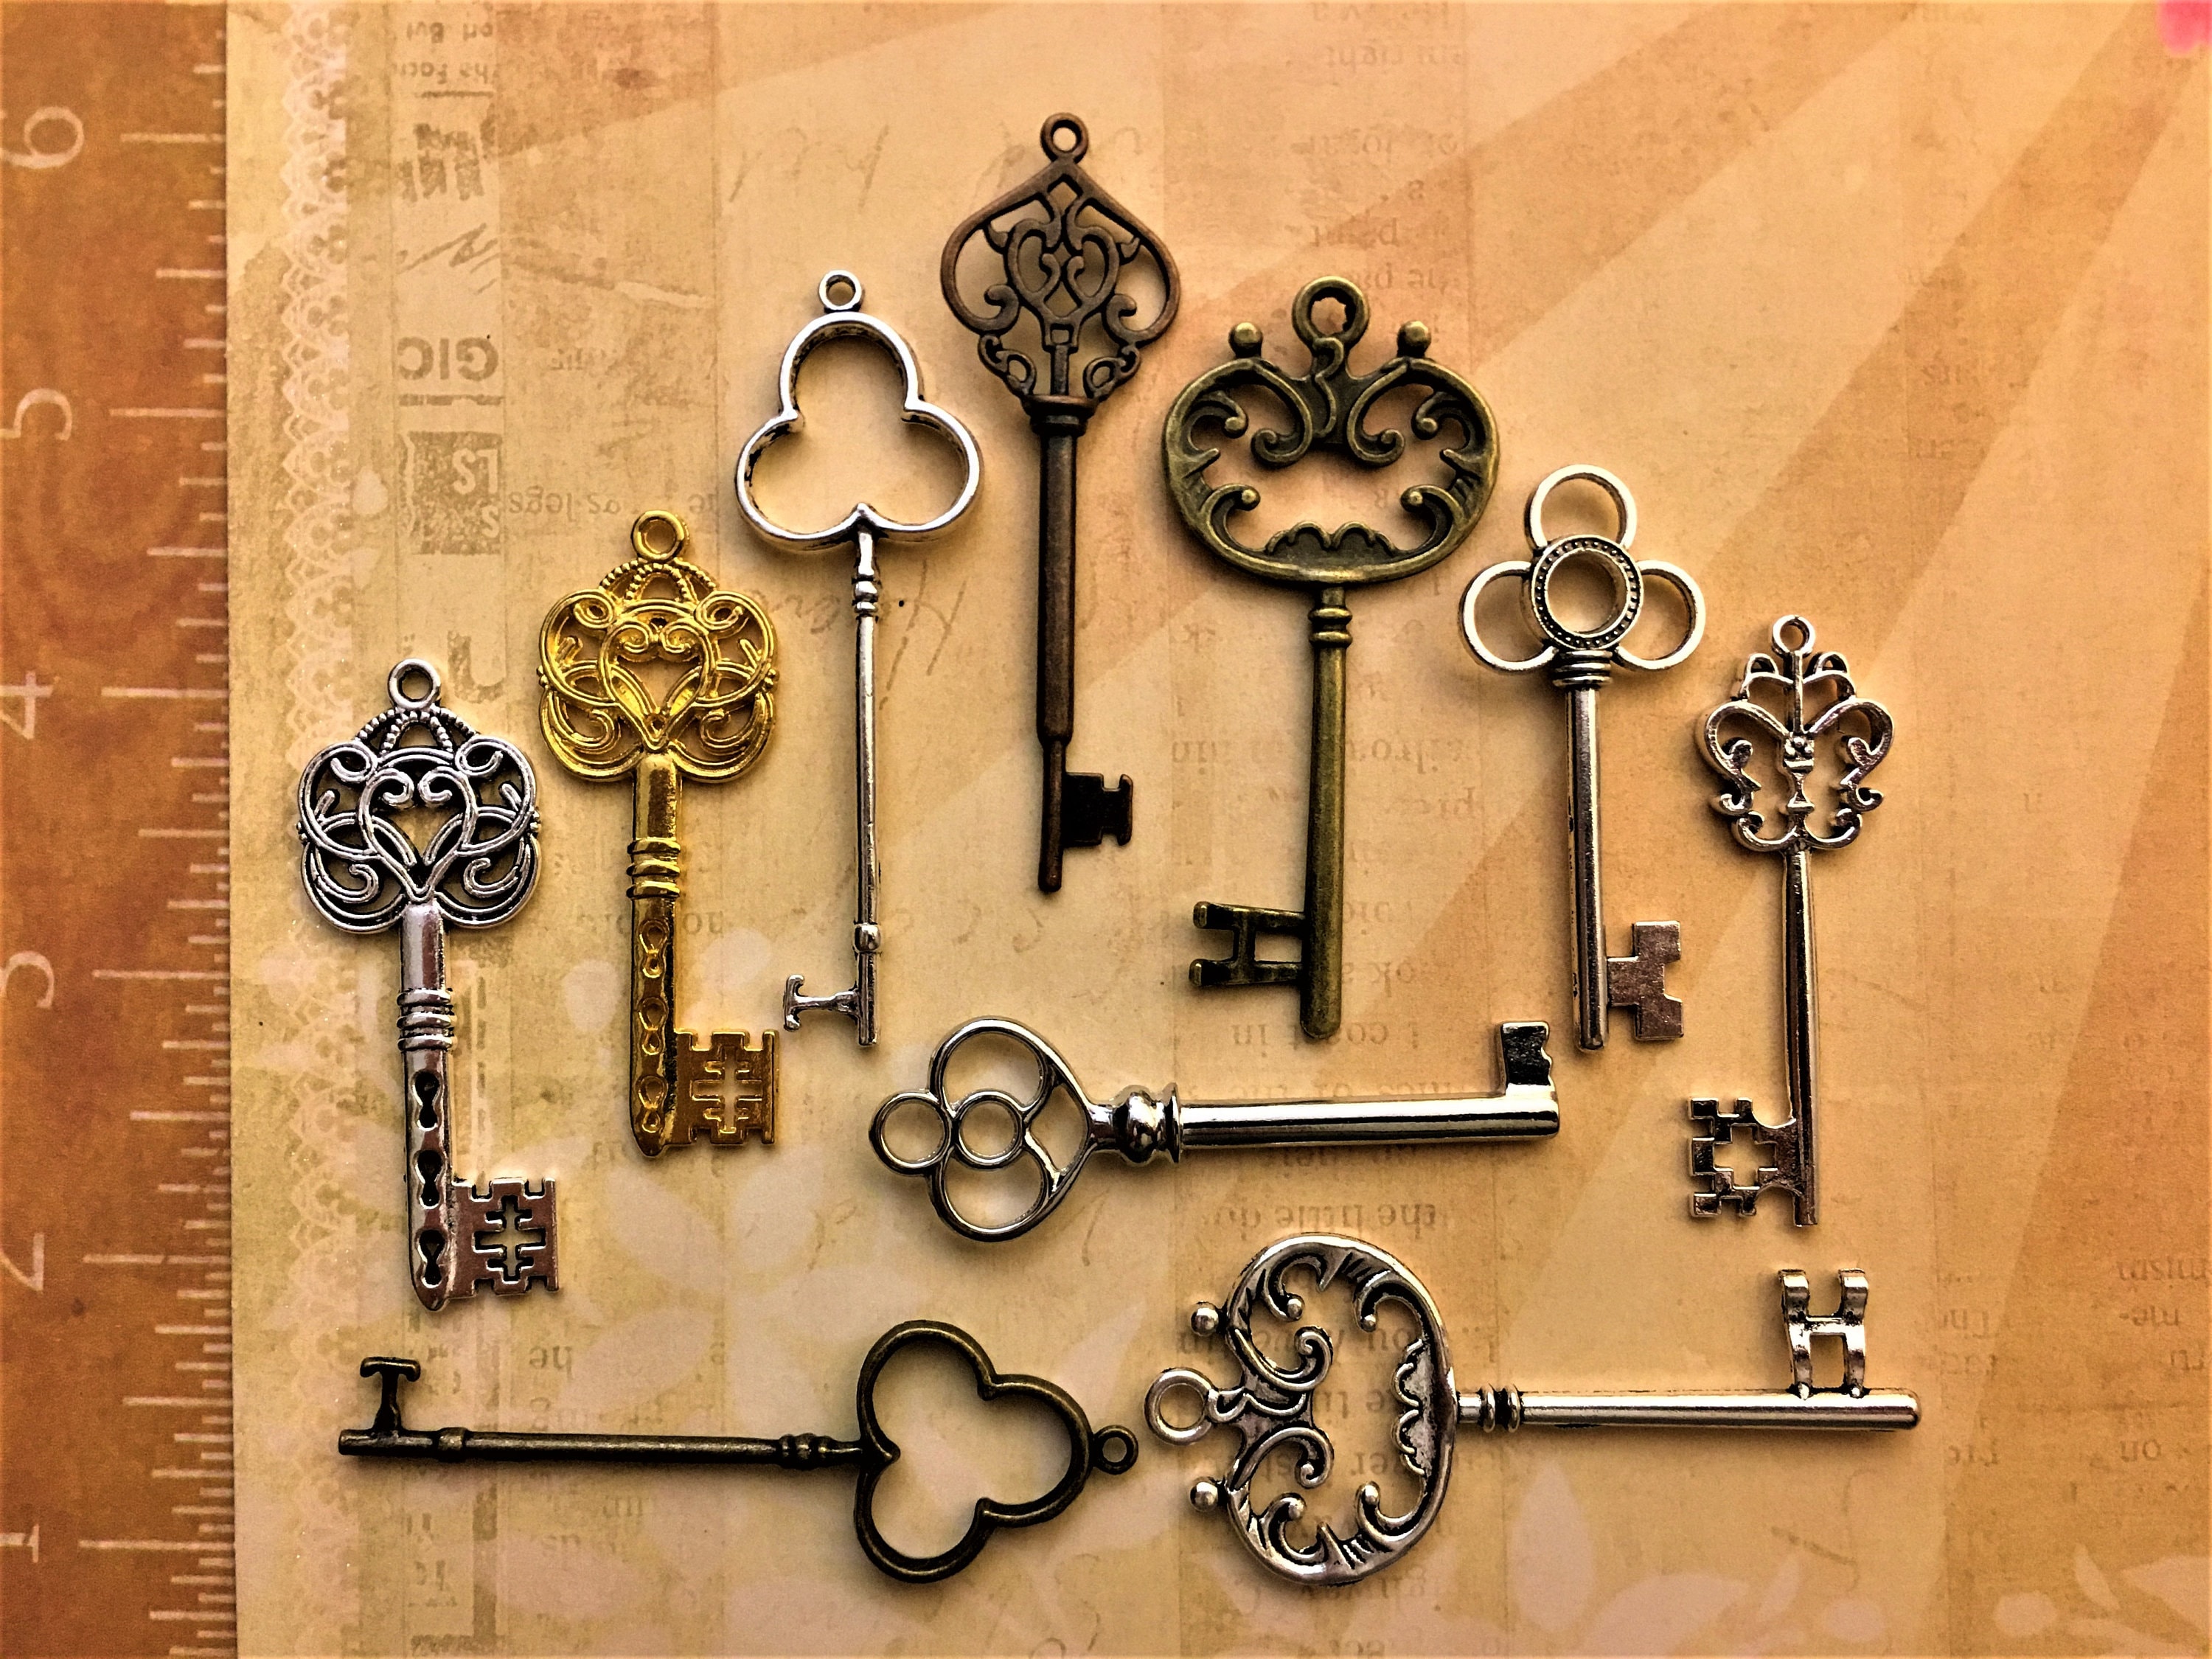 100 Replica Large Keys 2-2.5 Tall Mixed Color Vintage Antique Crafts Jewelry Pendants Wedding Decor Invitations Confetti Collection Basket